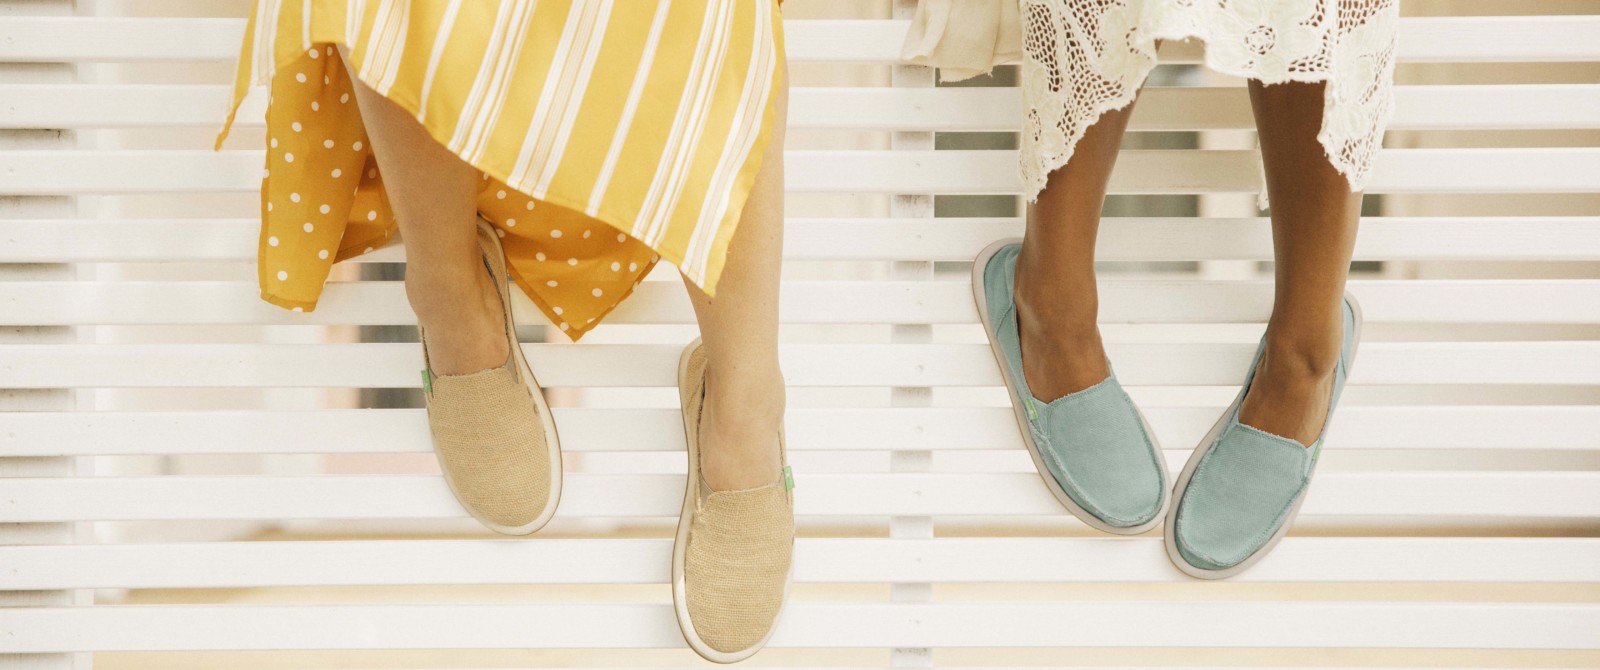 Home | Sound Feet Shoes: Your Favorite Shoe Store